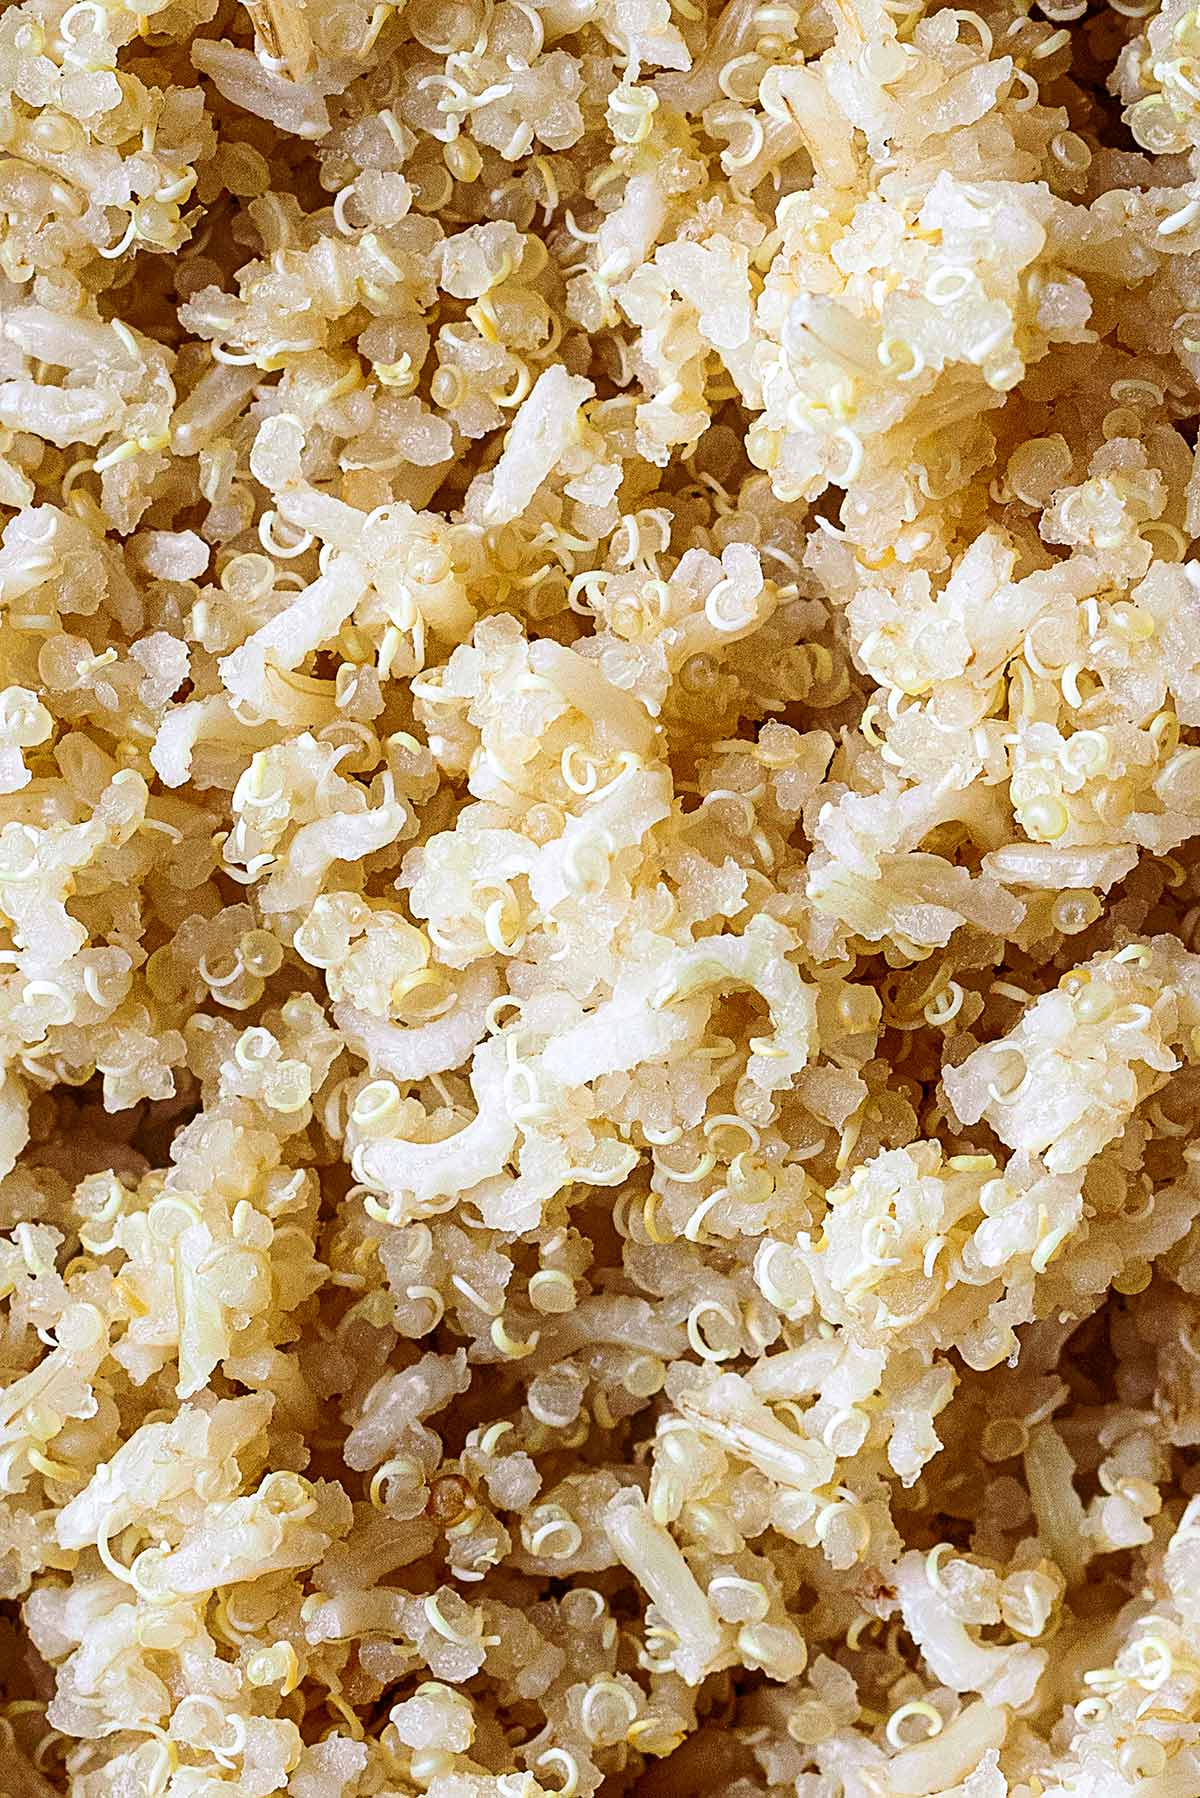 Grains of cooked quinoa and rice.